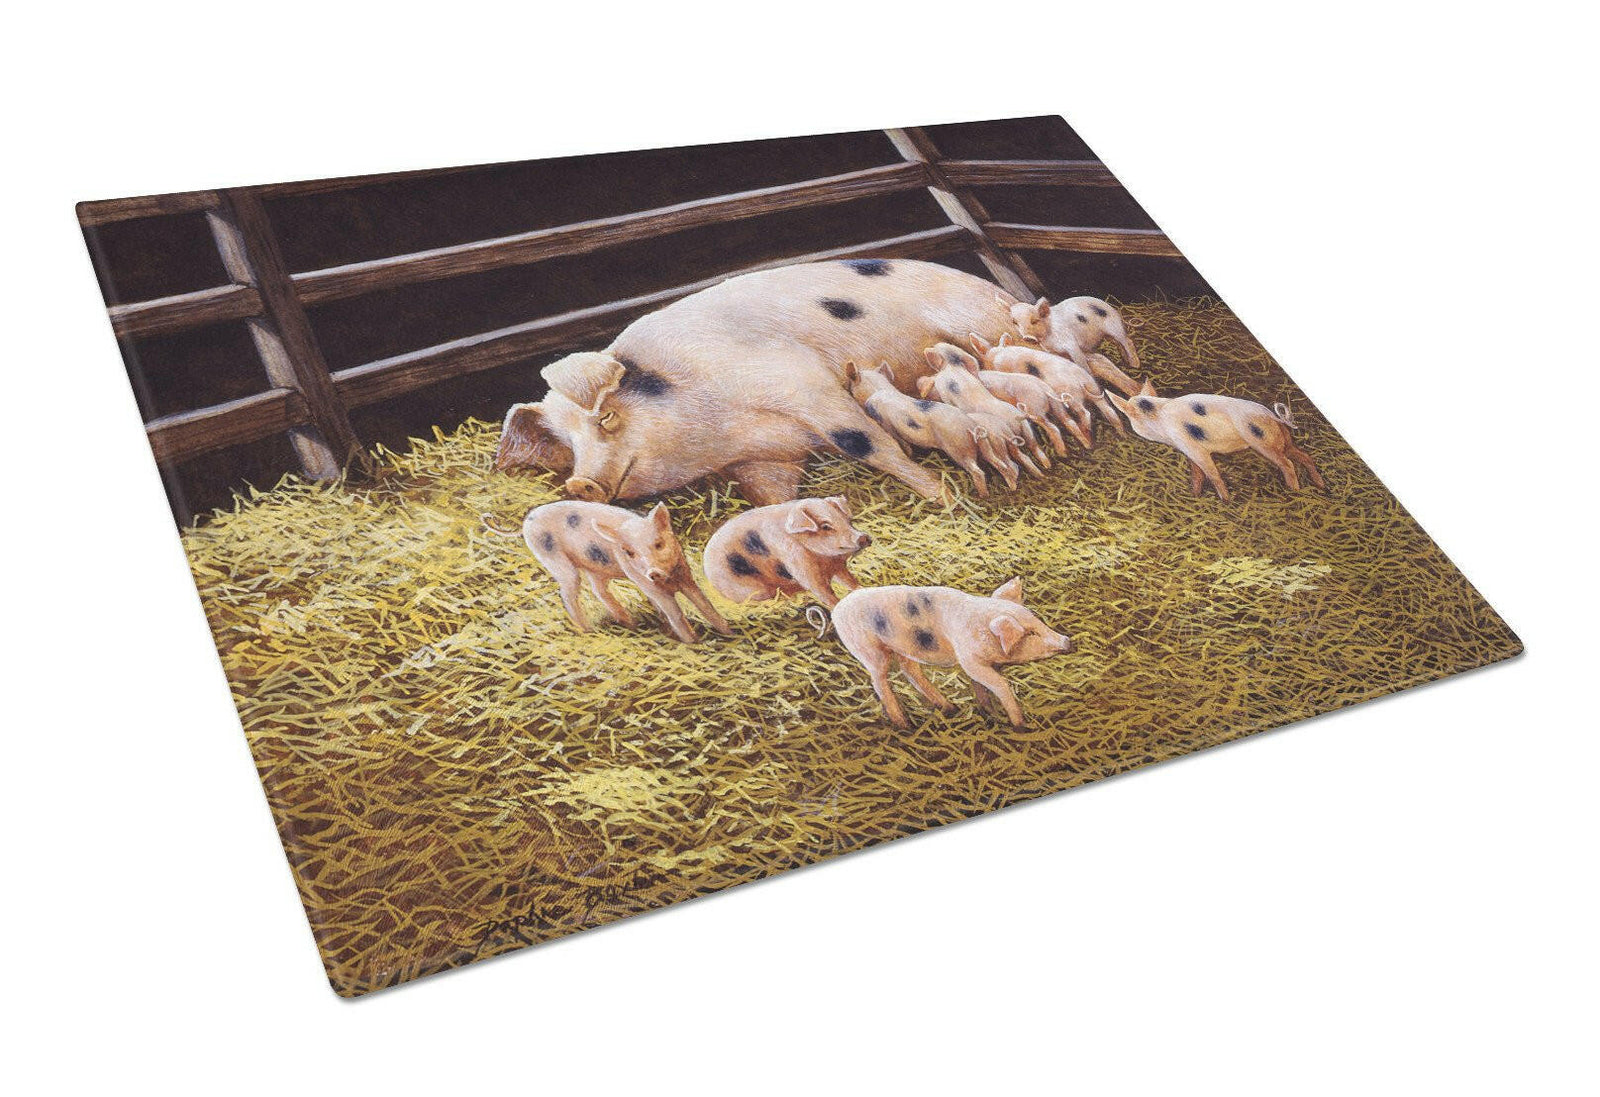 Pigs Piglets at Dinner Time Glass Cutting Board Large BDBA0296LCB by Caroline's Treasures